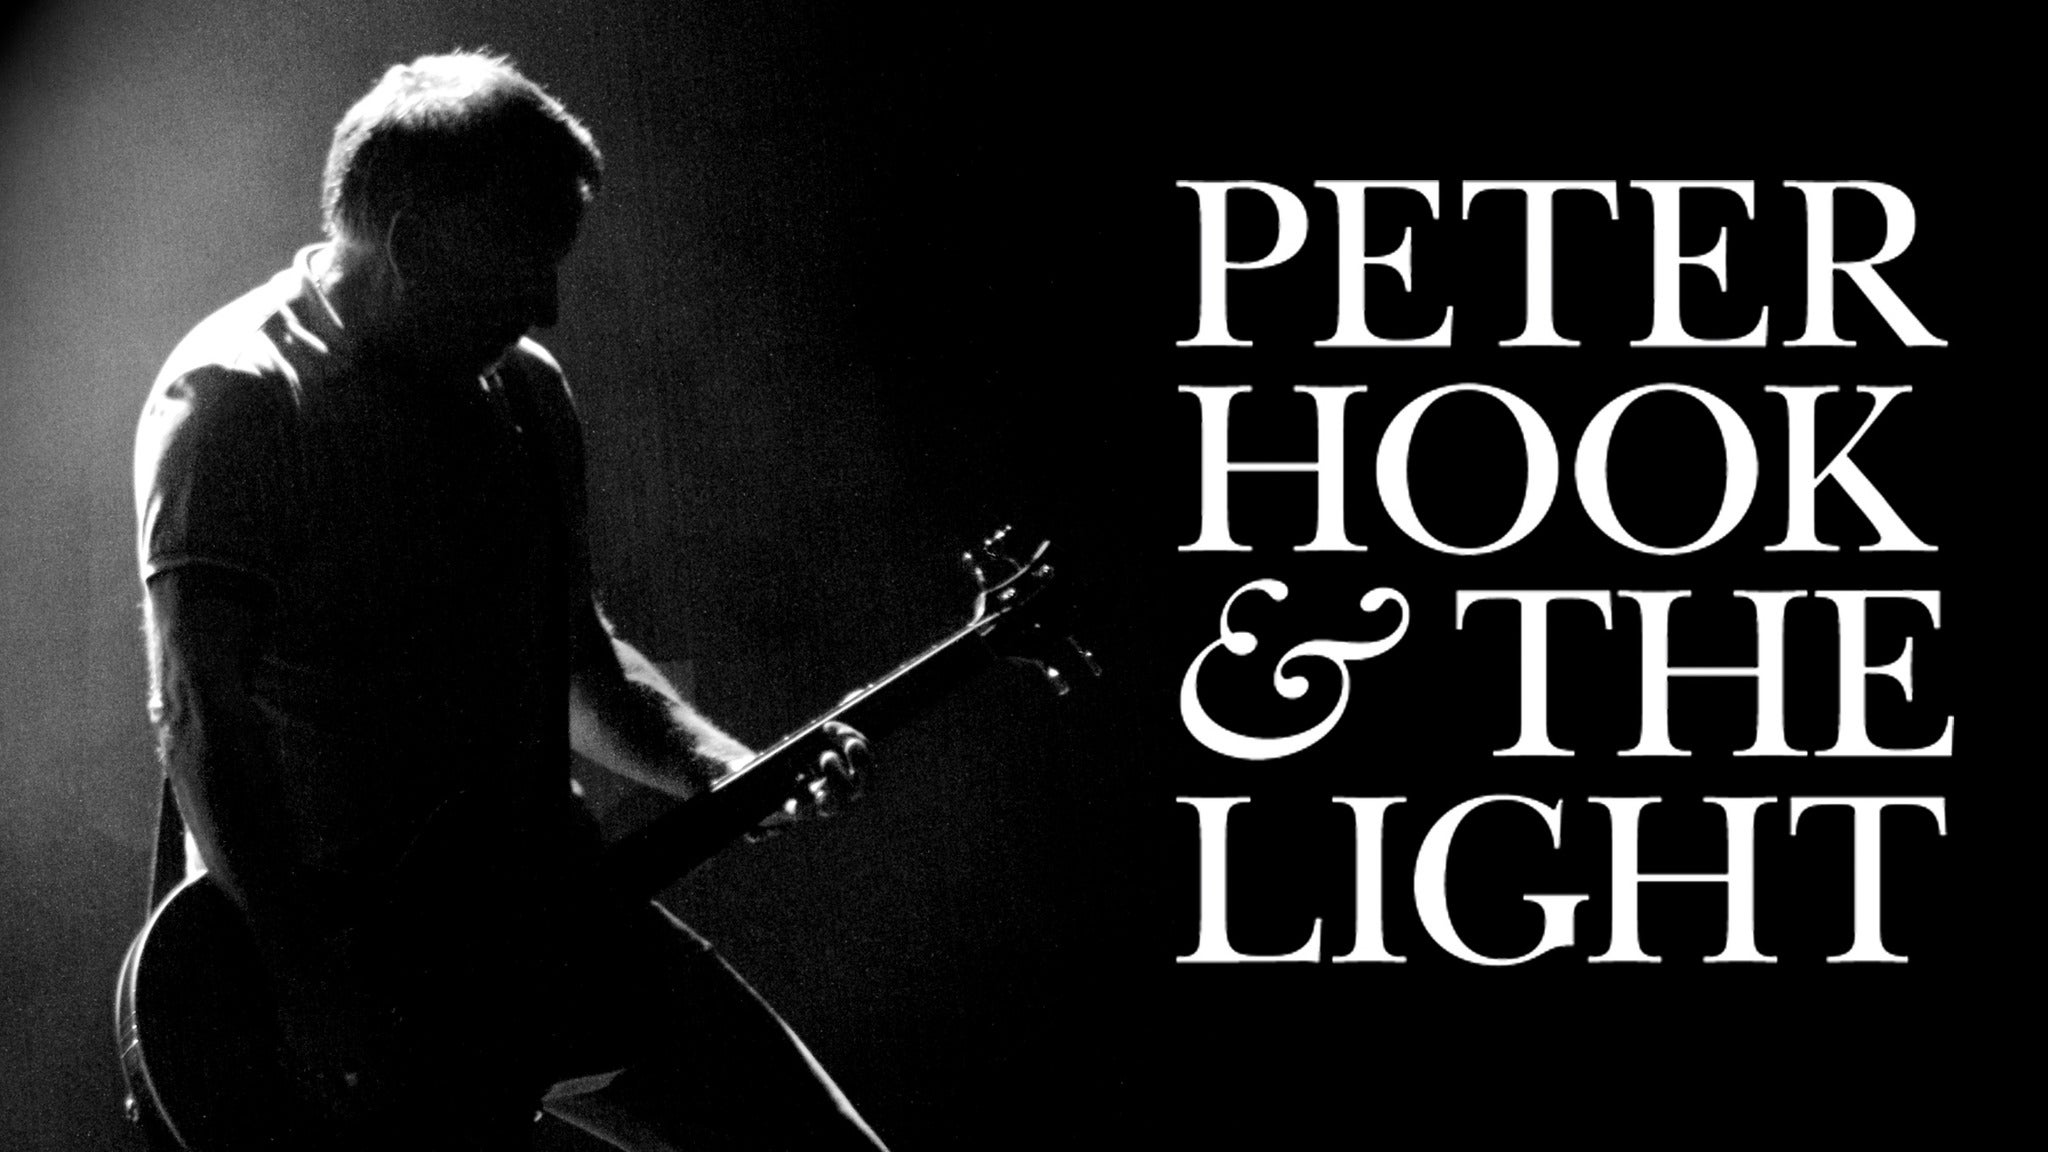 Peter Hook & The Light play Joy Division